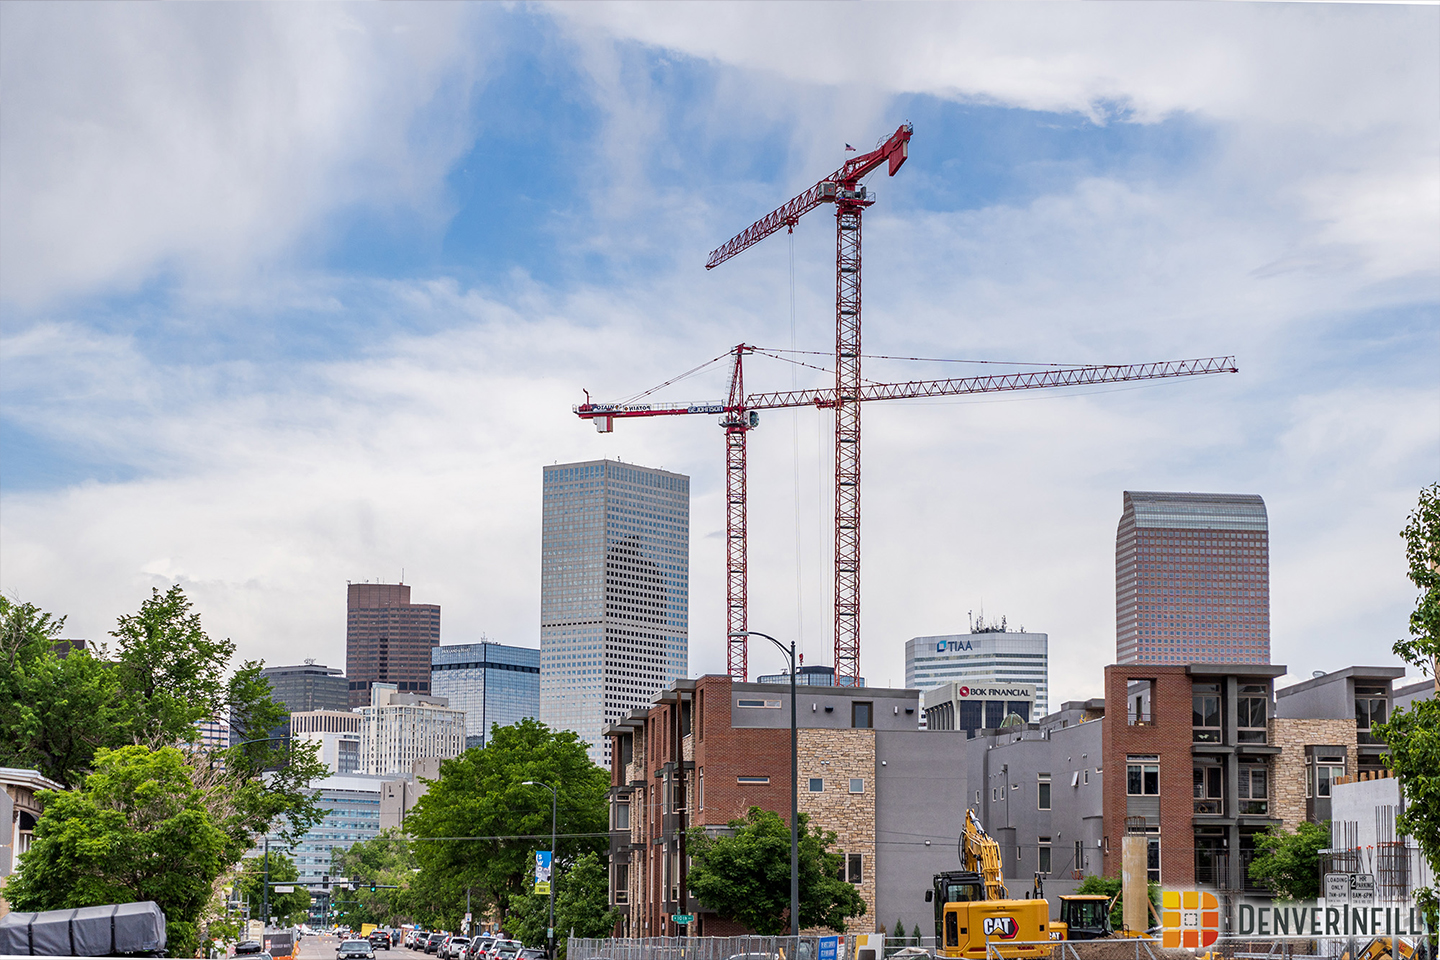 Downtown Denver development with cranes in the skyline. Image provided by Denver Infill.